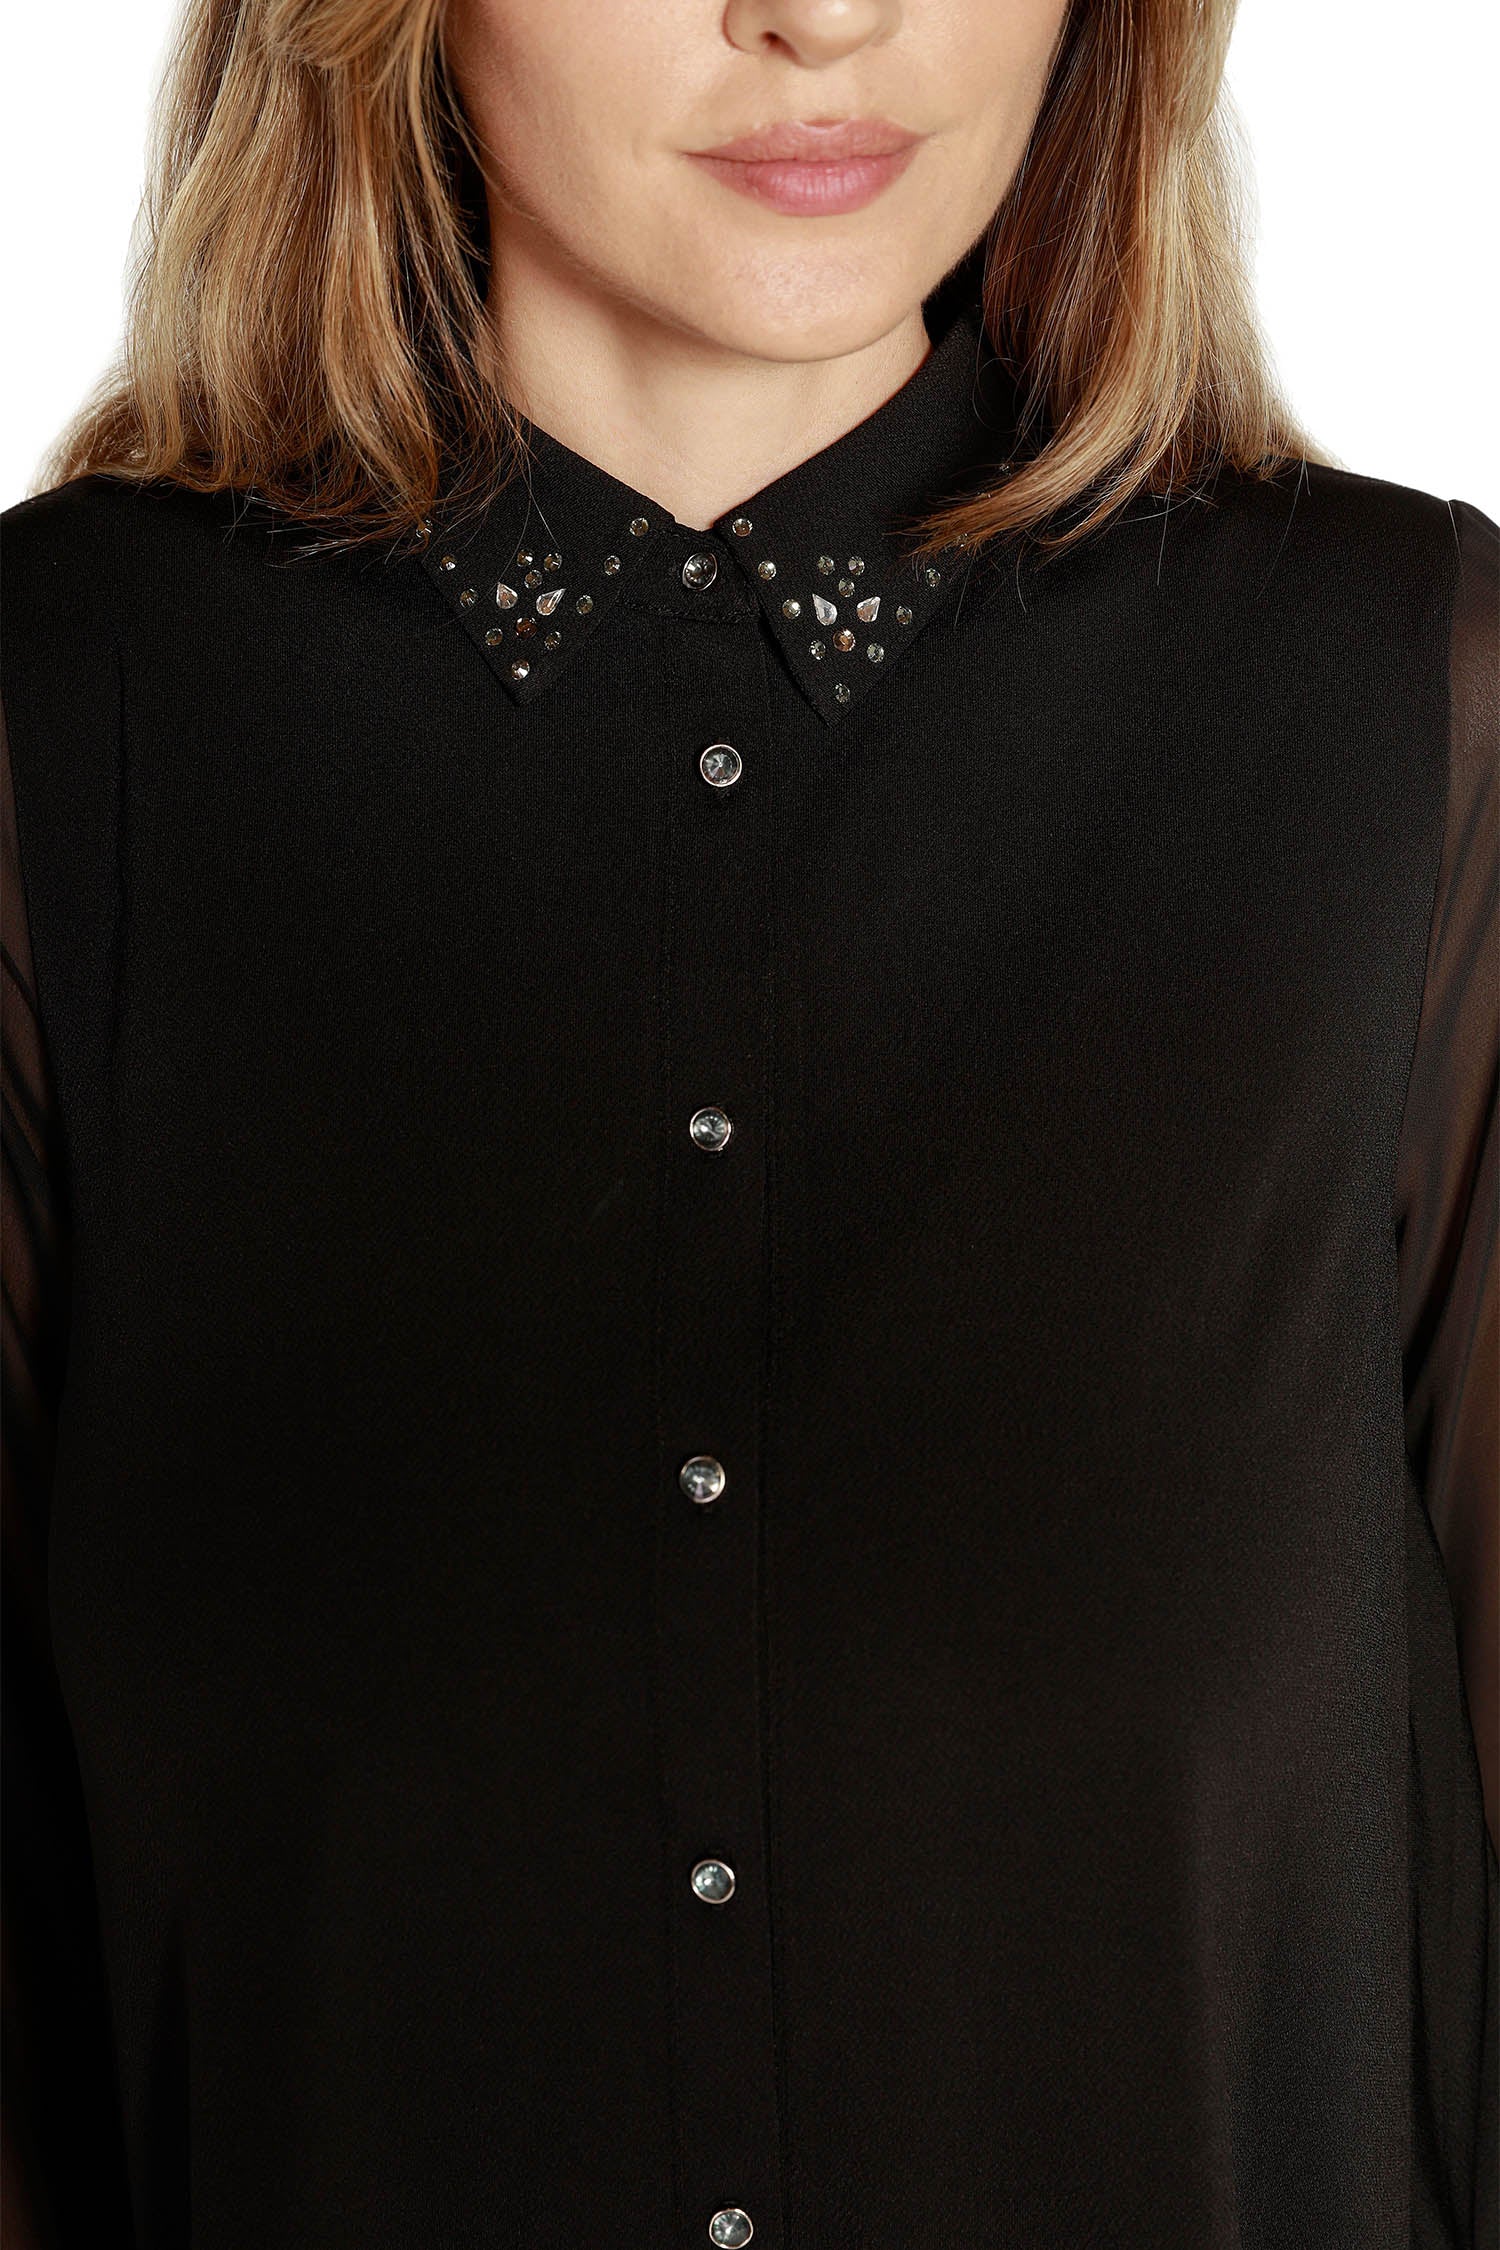 Womens Button Front Blouse with Pleated Back Chiffon Sleeves and Rhinestones on the Collar